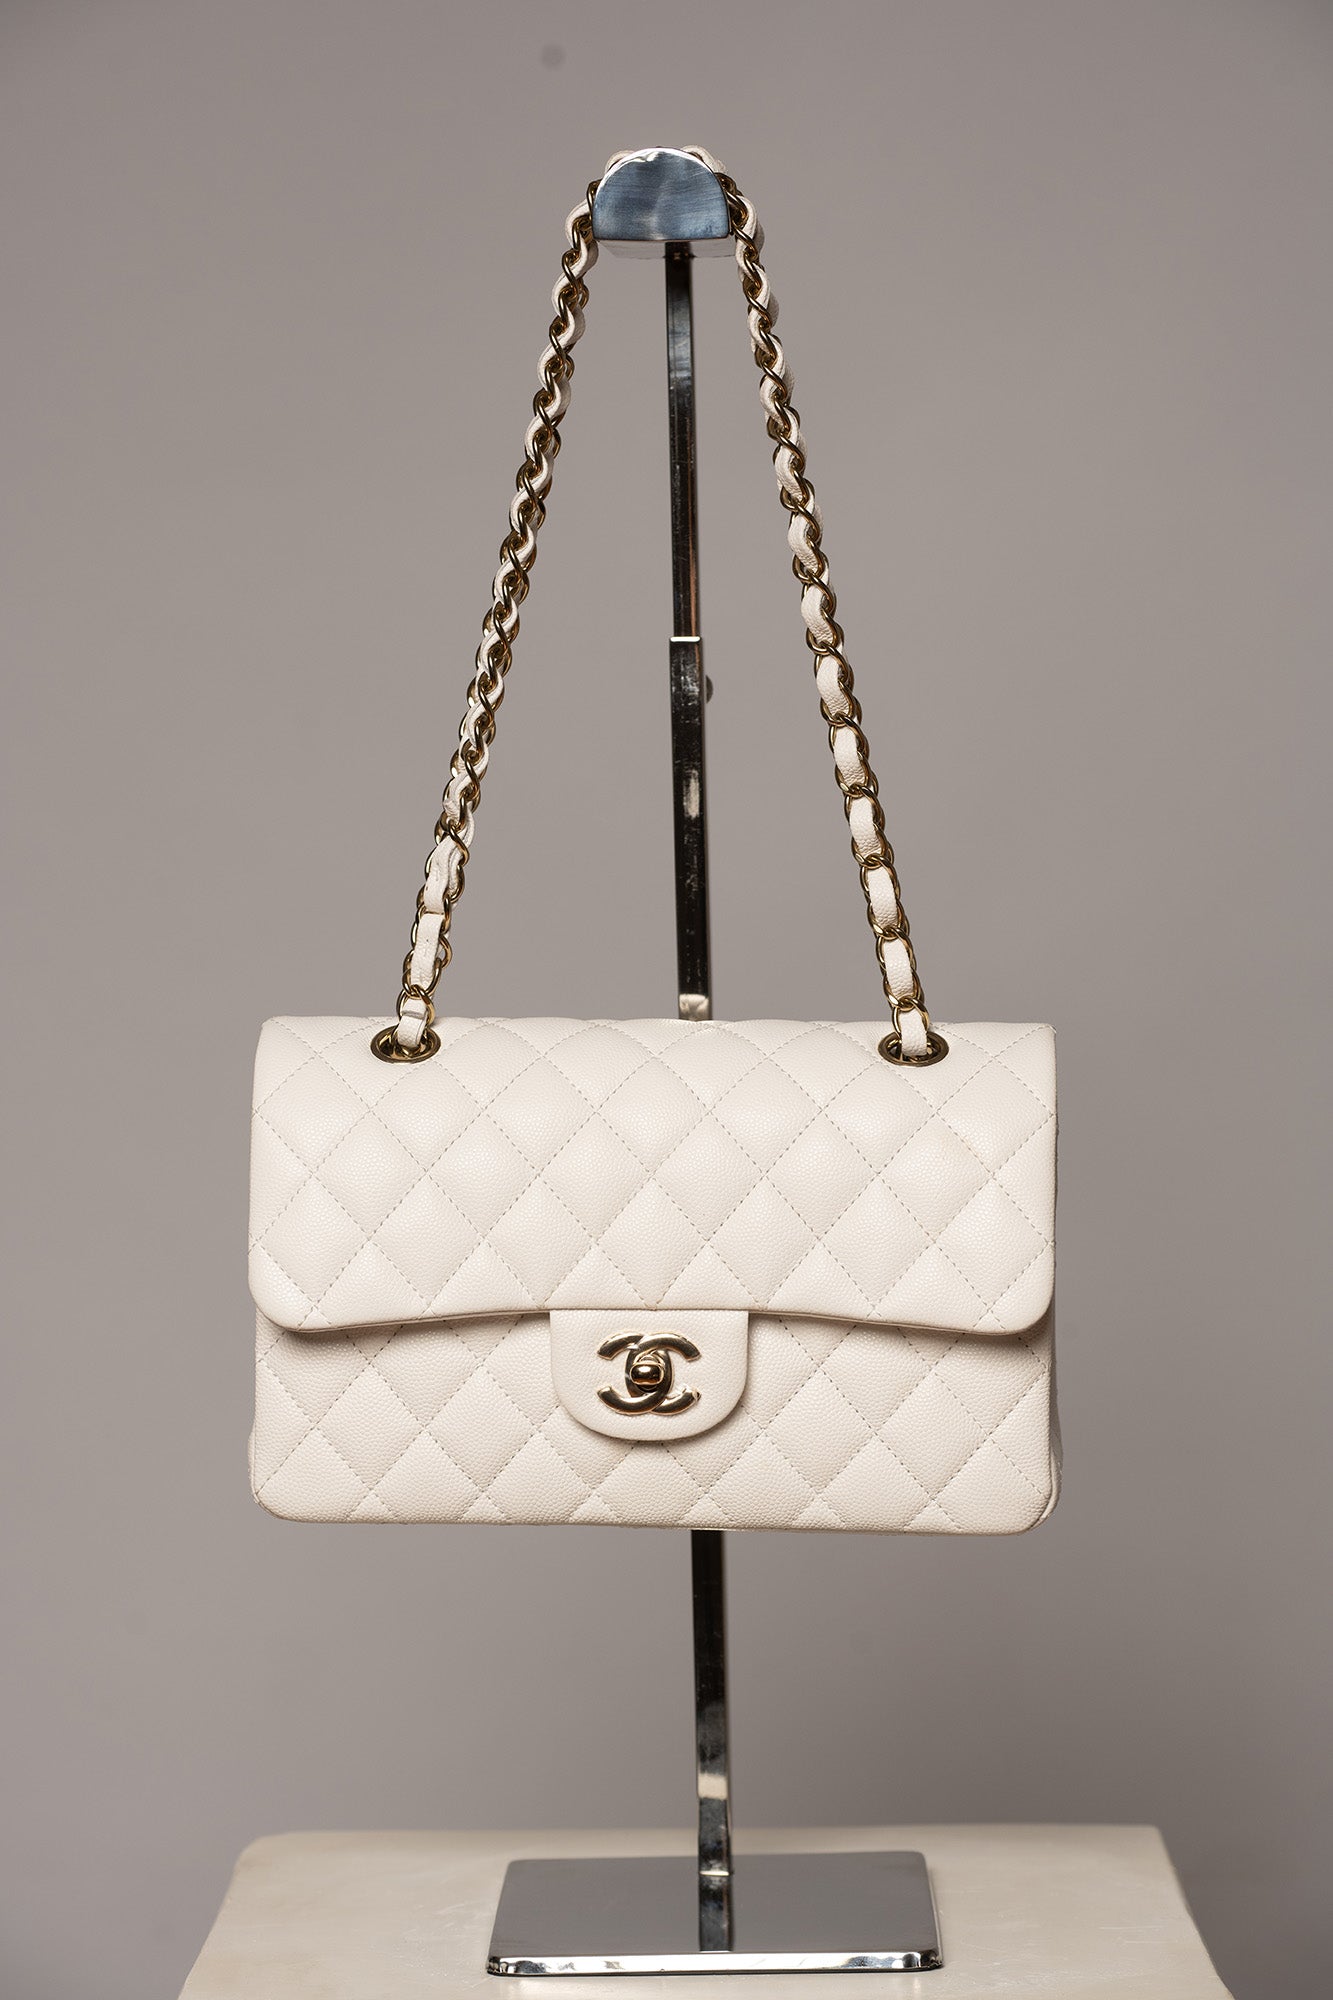 SOLD Chanel small classic flap bag  Classic flap bag Chanel classic  flap bag Chanel flap bag